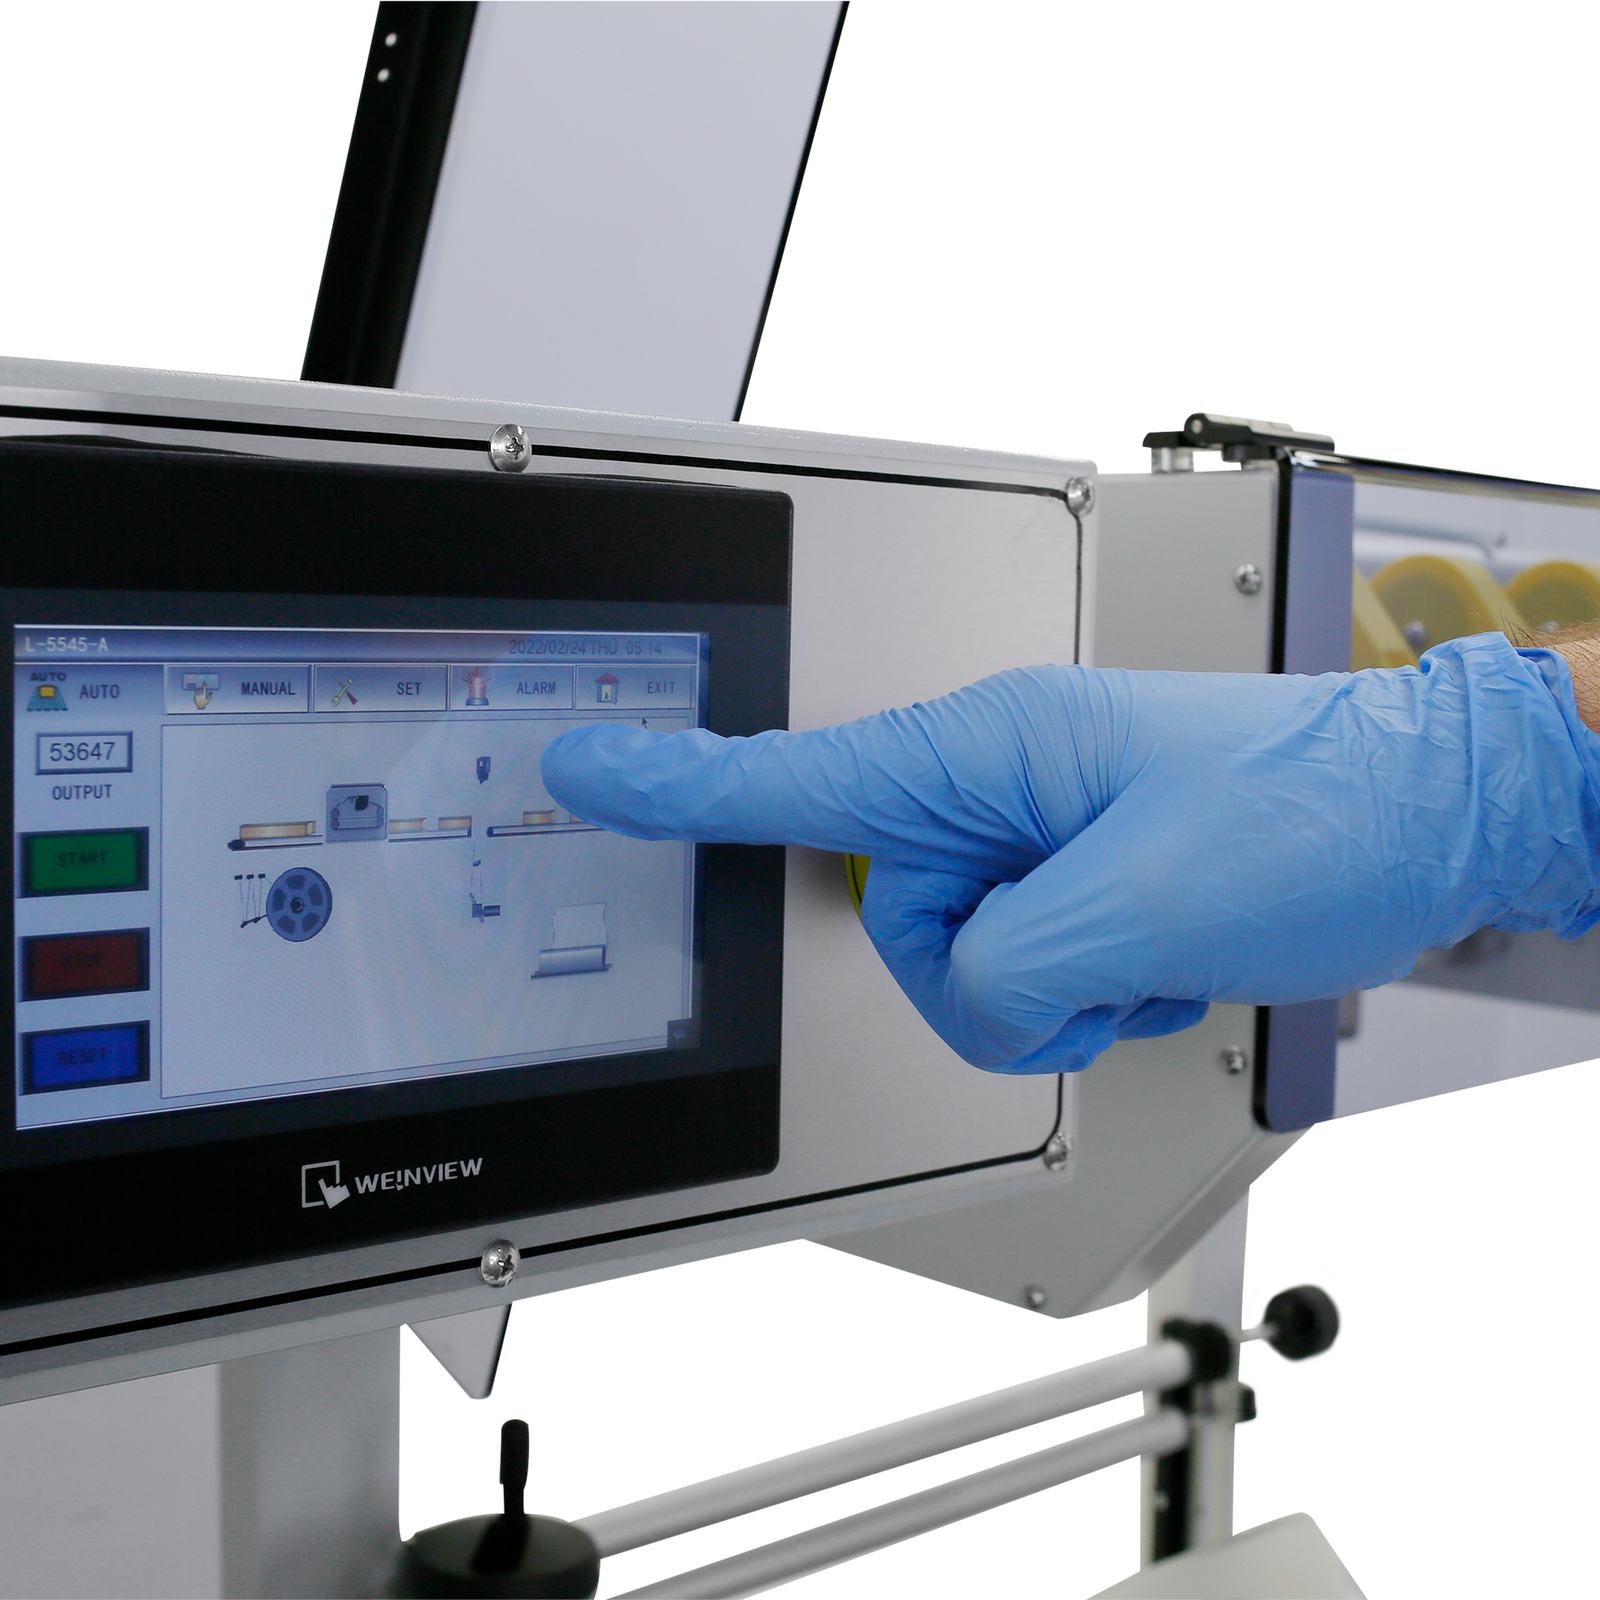 Close up shows the hand of a person touching the touchscreen panel of the JORESTECH Automatic L Bar Film Sealer to set it before stating production.